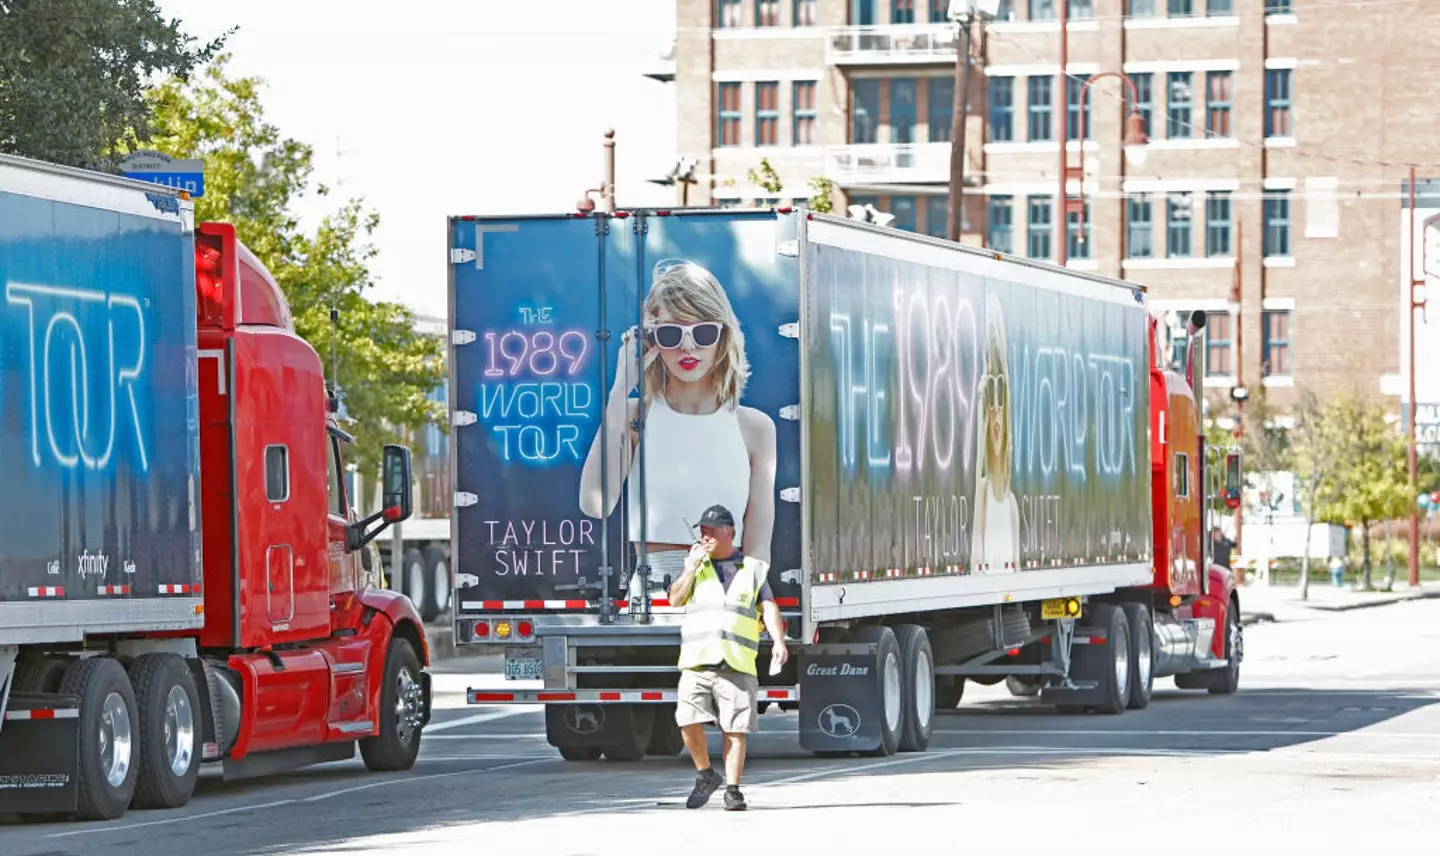 It takes a pretty hefty logistical effort to cart all of Swift's gear around. (Steve Gonzales/Houston Chronicle via Getty Images)